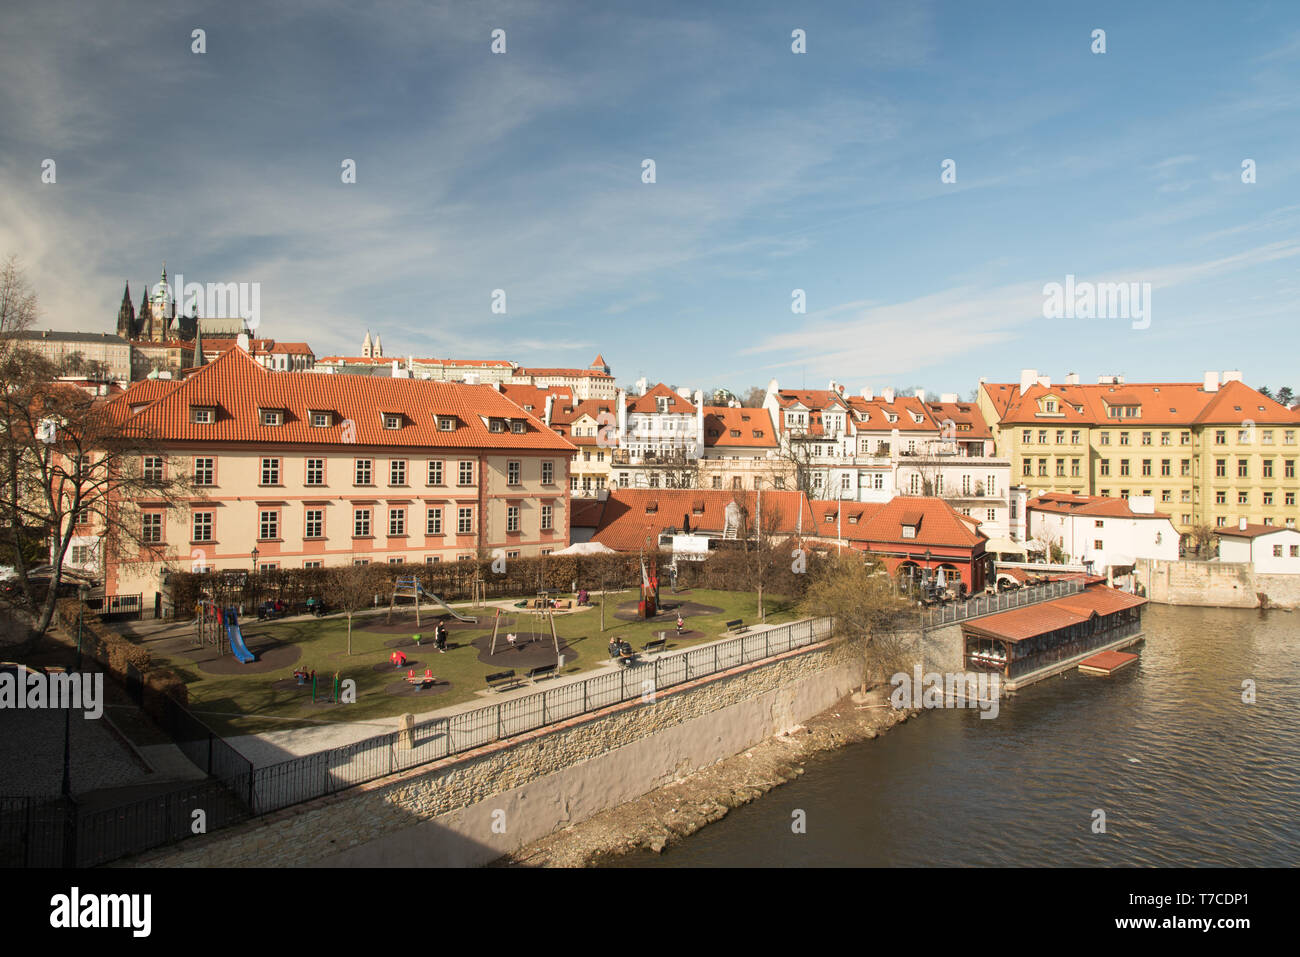 beautiful Praha city scenery with Prazsky hrad on the background from Karluv most bridge in Czech republic during nice early spring day Stock Photo